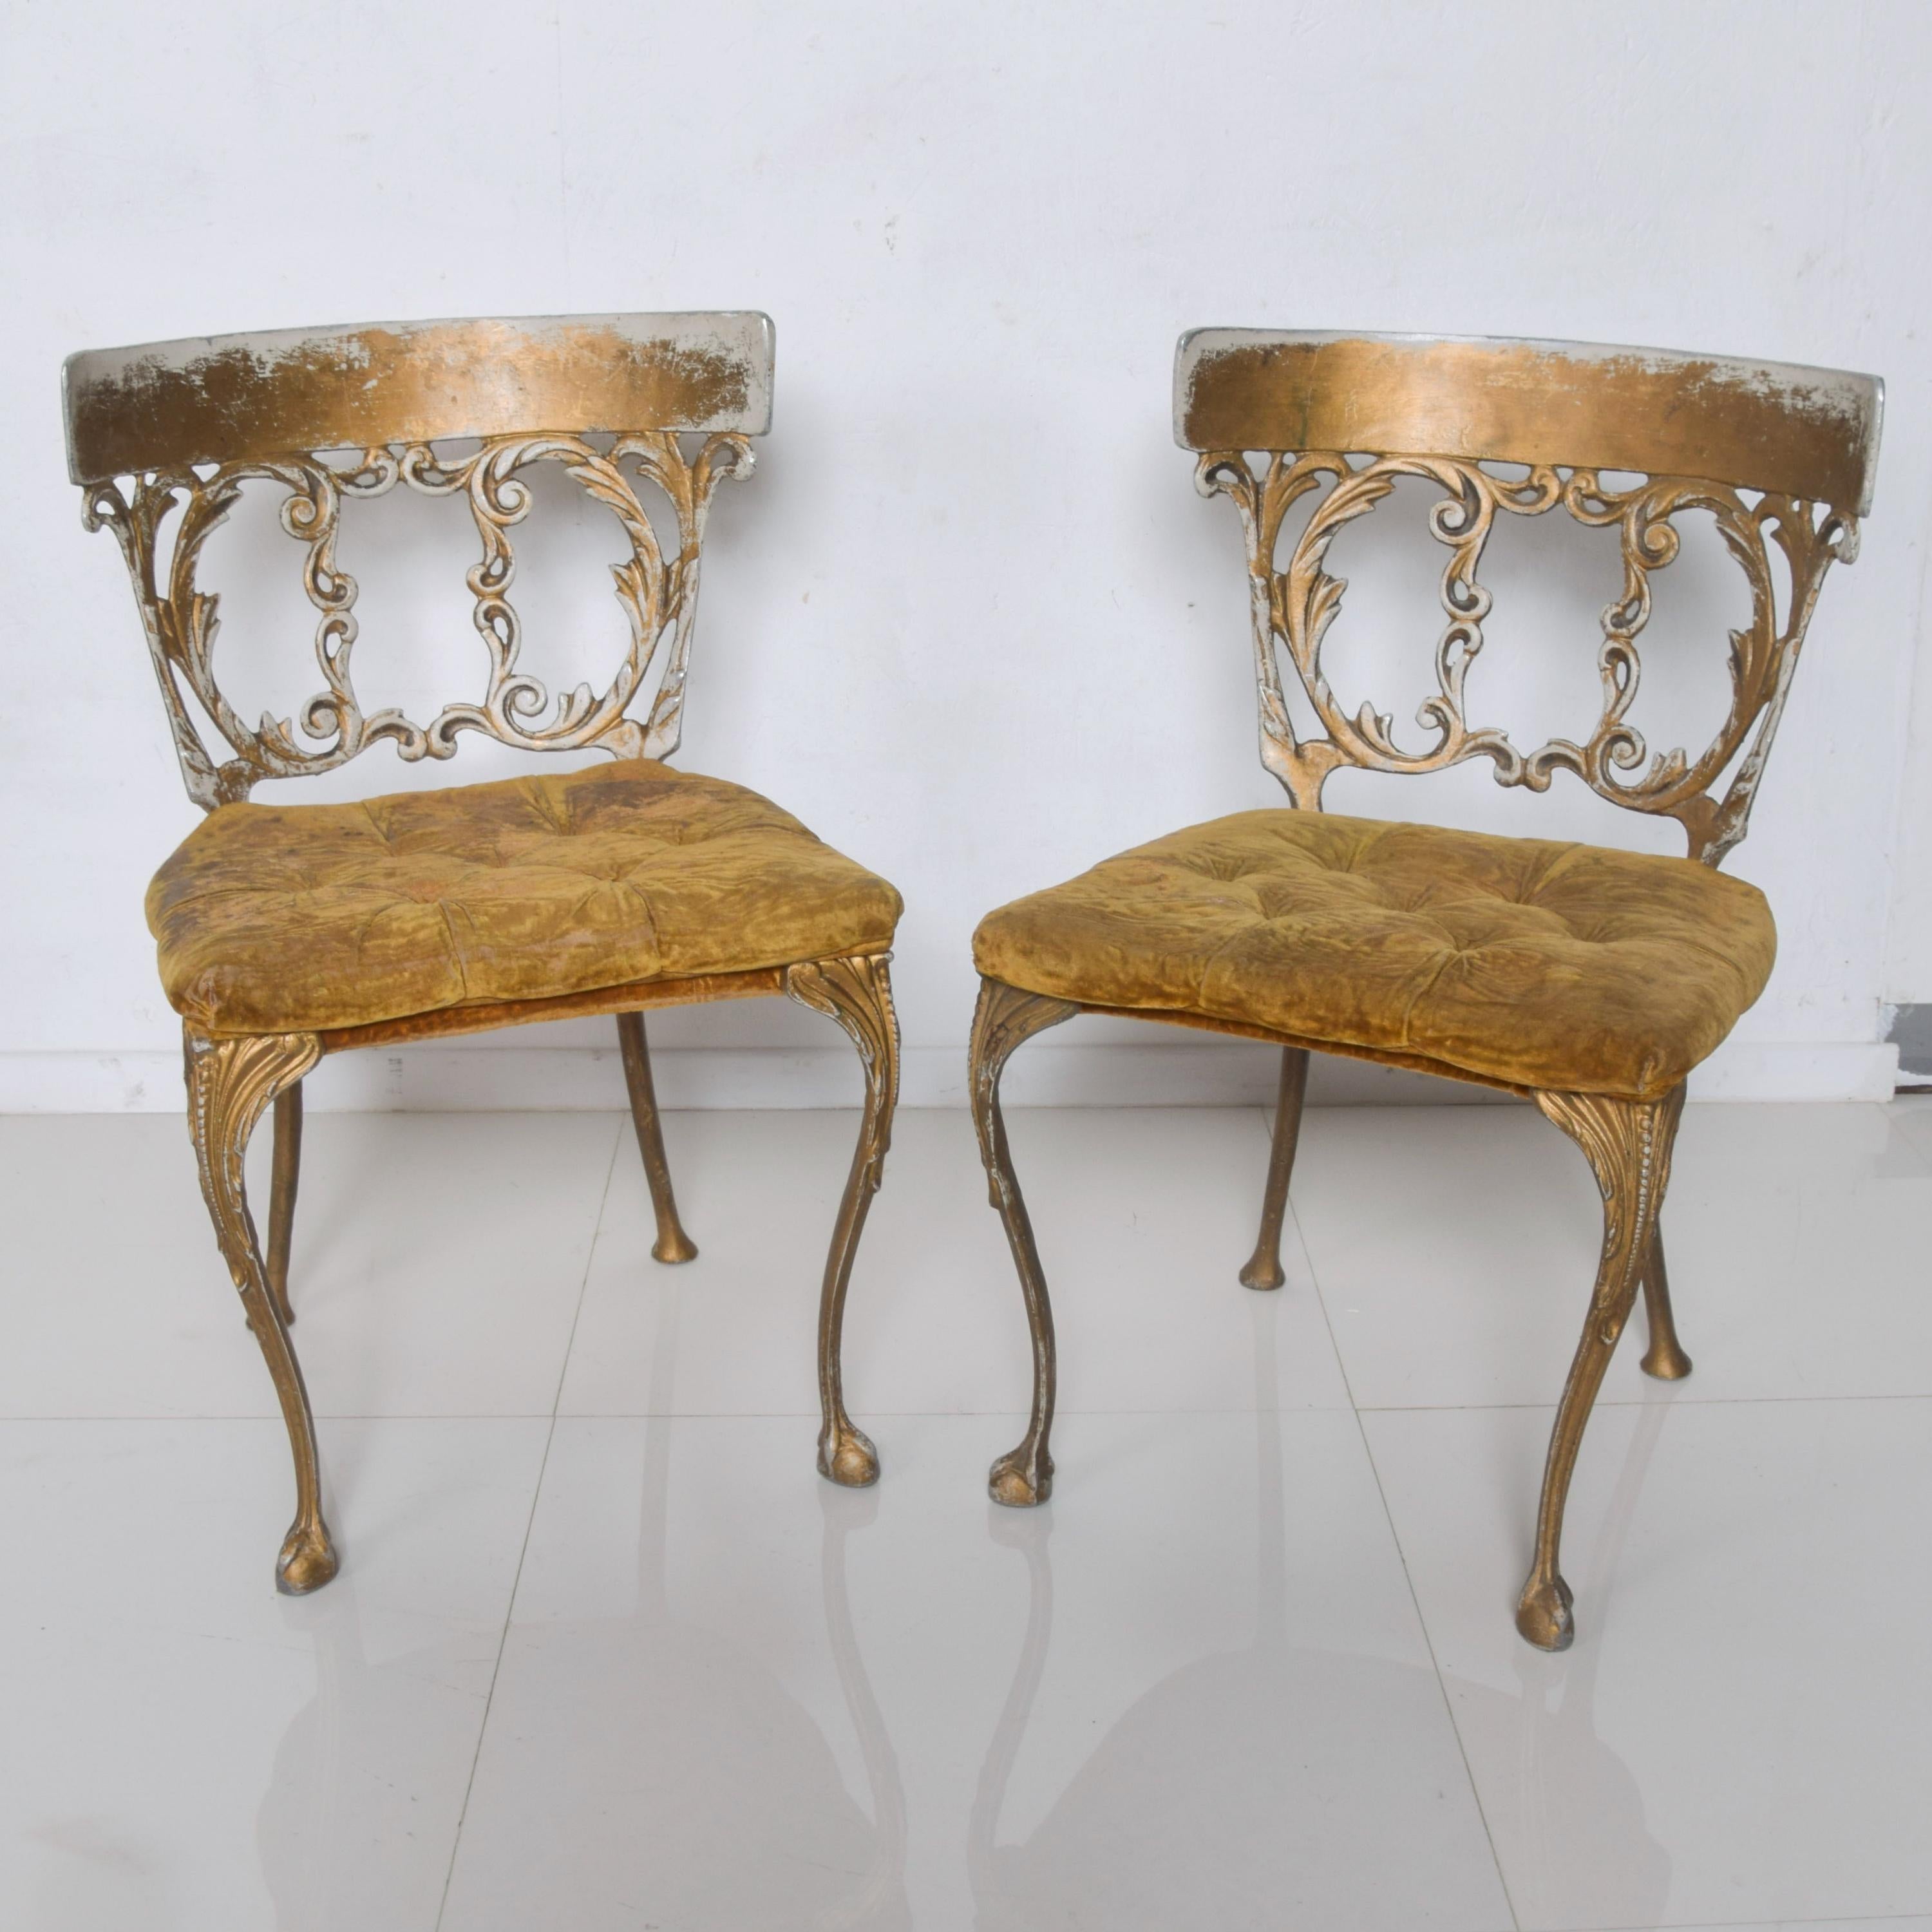 In the style of Arthur Court vintage neoclassical gold velvet chairs 1970s
Sophisticated with fabulous flair. Cabriole legs and lovely gold scroll.
Unmarked
Completely unrestored untouched vintage preowned condition. Selling as is. 
Waiting for